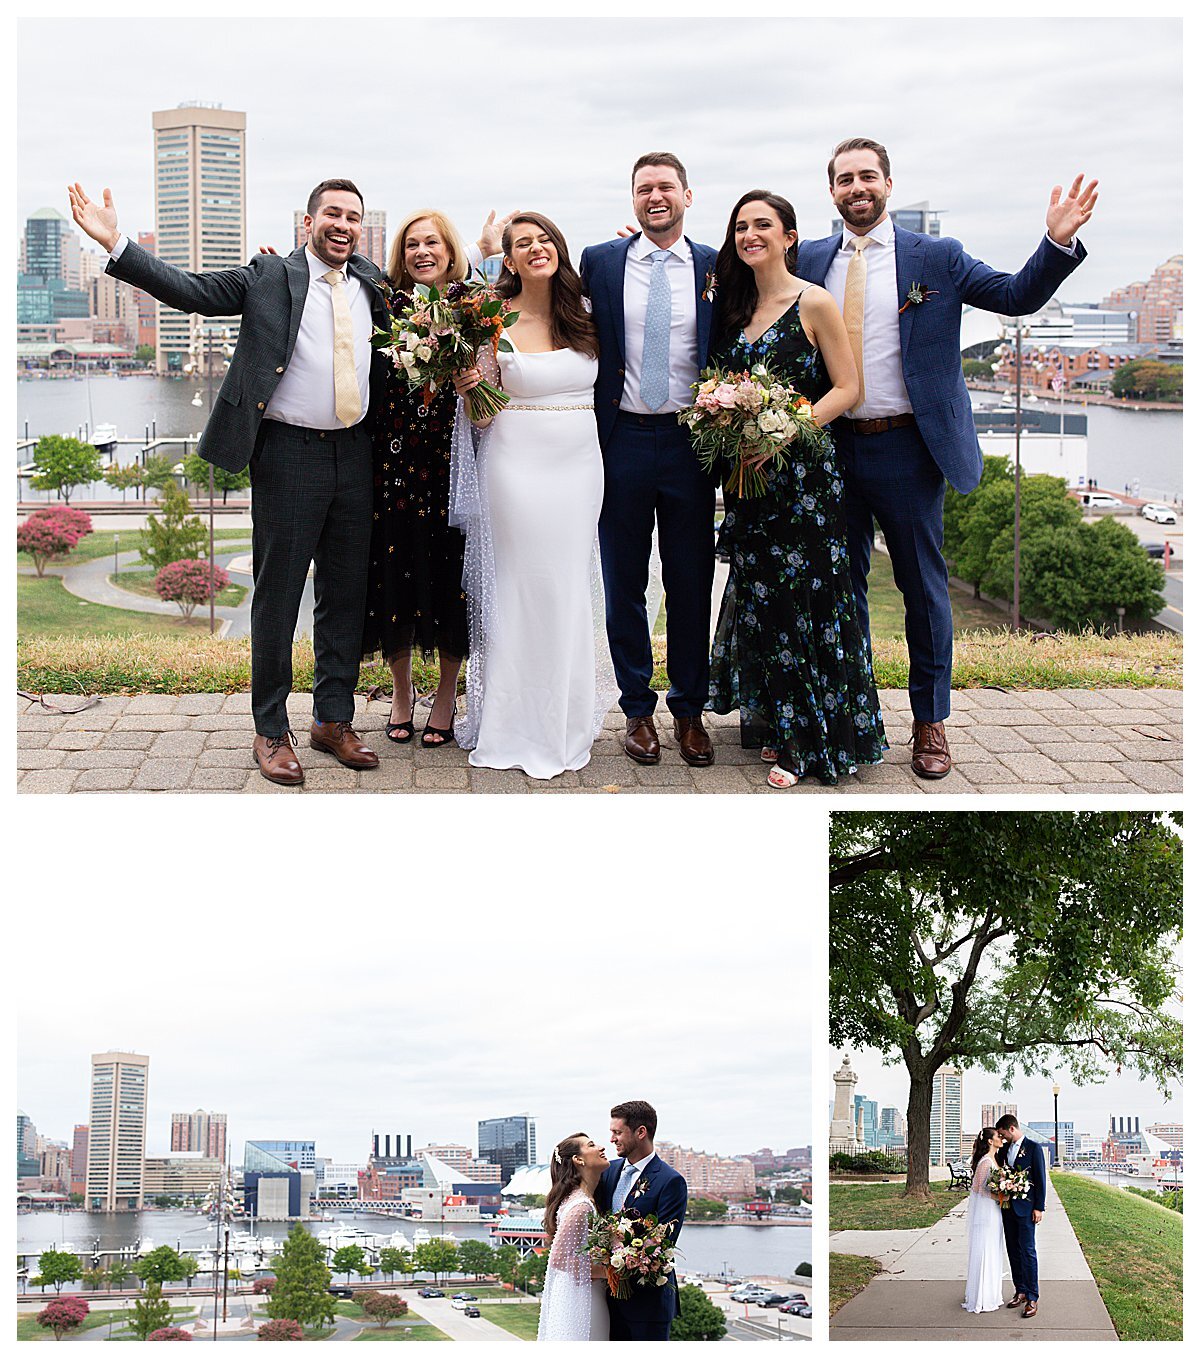 federal_hill_wedding_portraits_american_visionary_arts_museum_baltimore_maryland_kelly_loss_photography.JPG